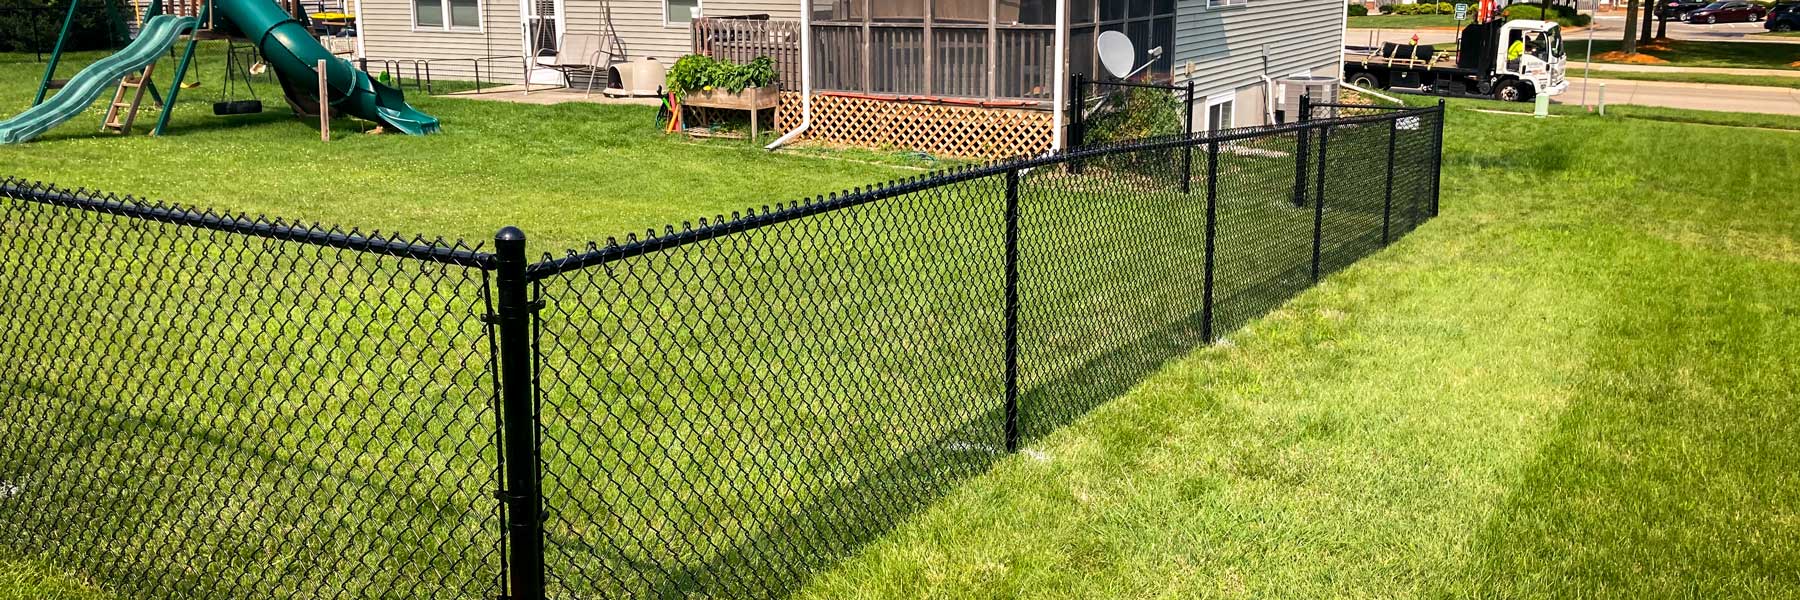 Cedar Rapids fence company chain link fence residential fencing contractors Iowa playground chain link gate posts tubing pipe top rail chain link fabric wire mesh galvanized aluminum vinyl coated black brown green 9 gauge fence fencing security perimeter hinges installation repair costs panels hardware fittings